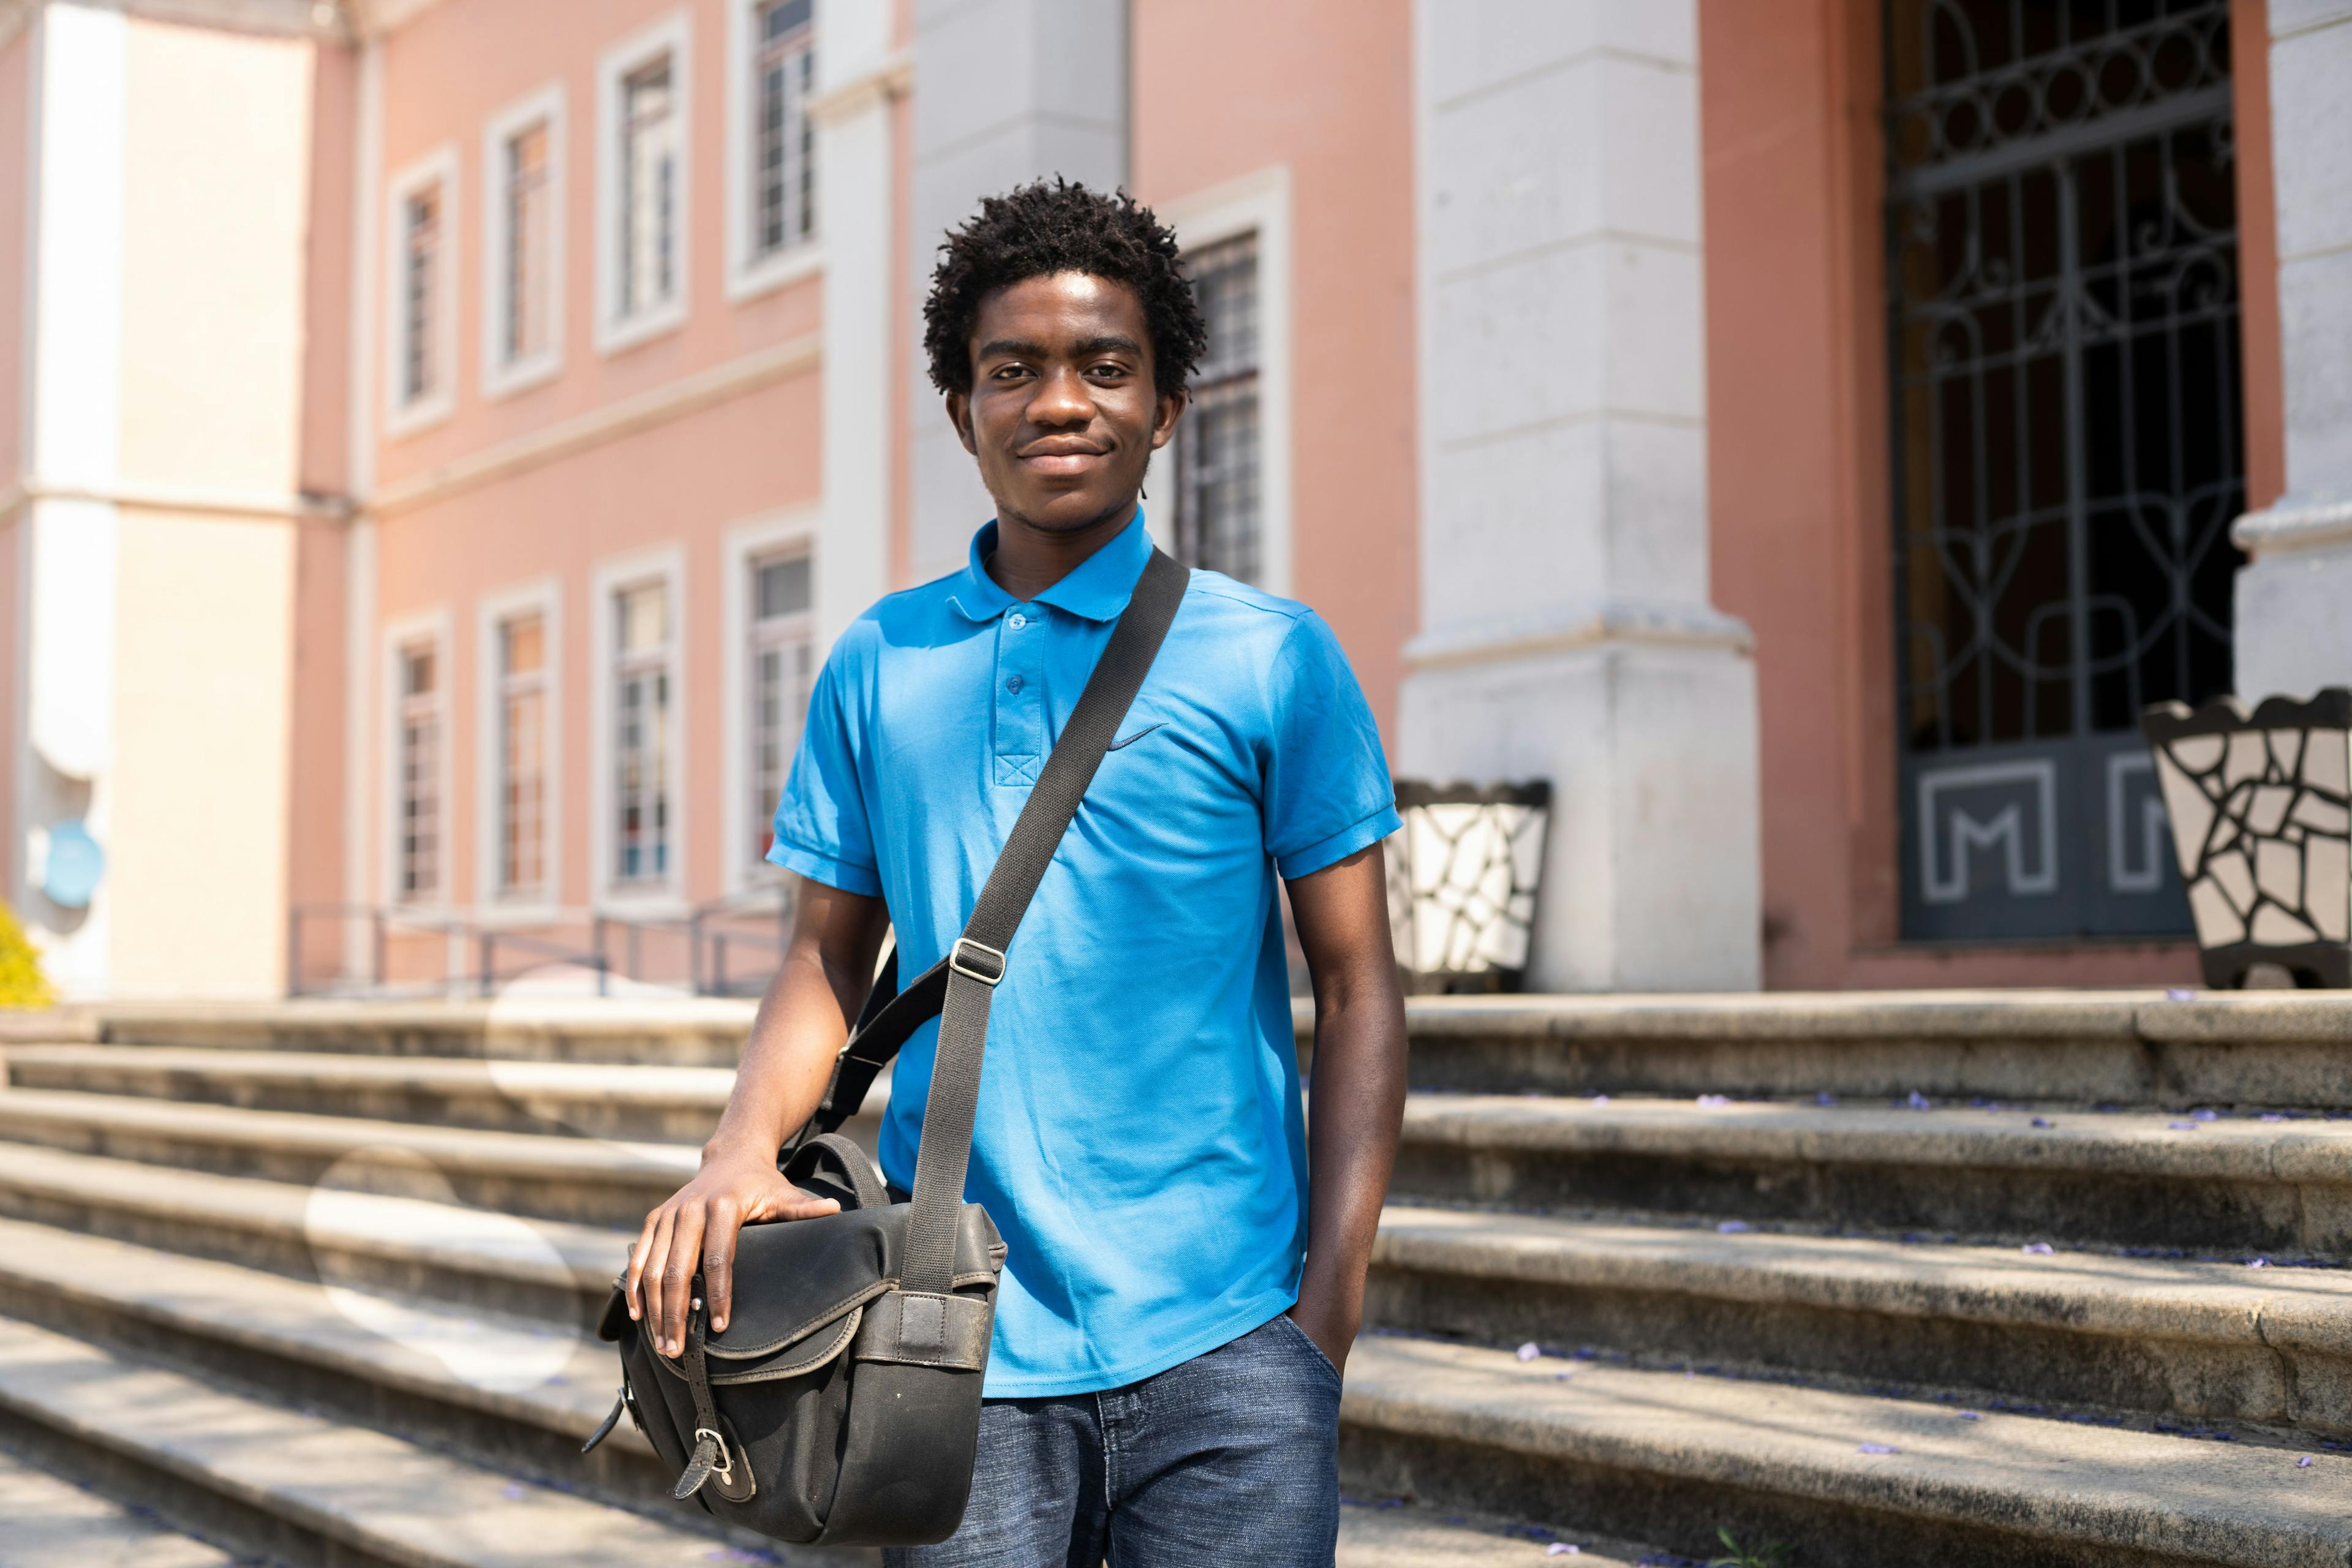 The gender gap: men have more options. Young, more educated men are likelier to migrate, and have greater choice in the matter. Women are less able to choose this option, even if they want to. Carlos Junior (20) could move from rural Angola to attend university here because he has his mother’s financial support.